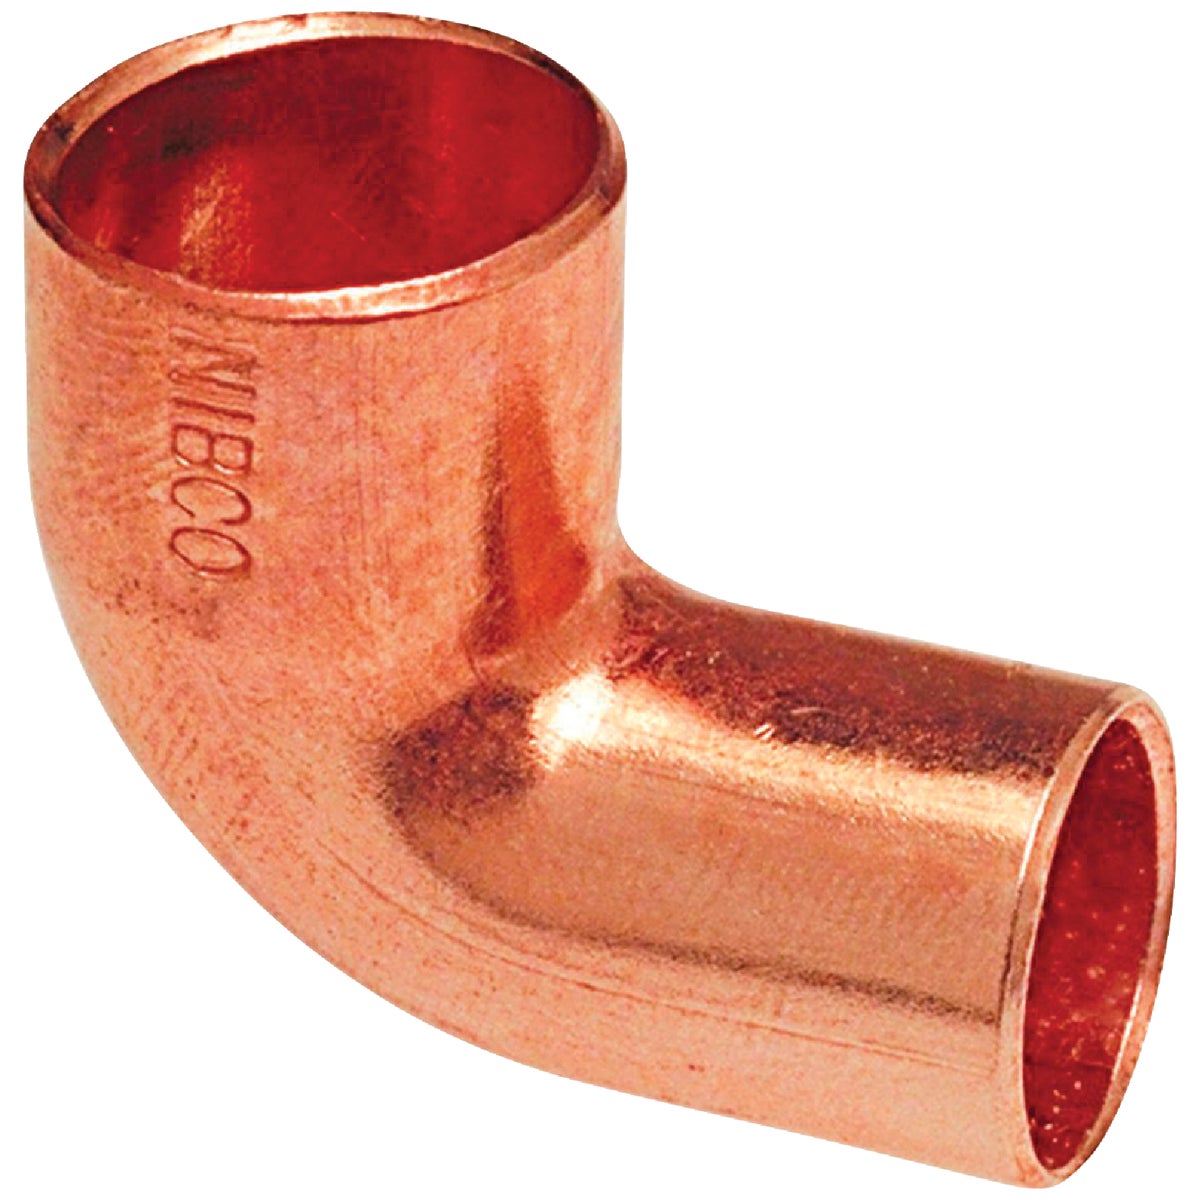 Item 418248, Fitting to copper.